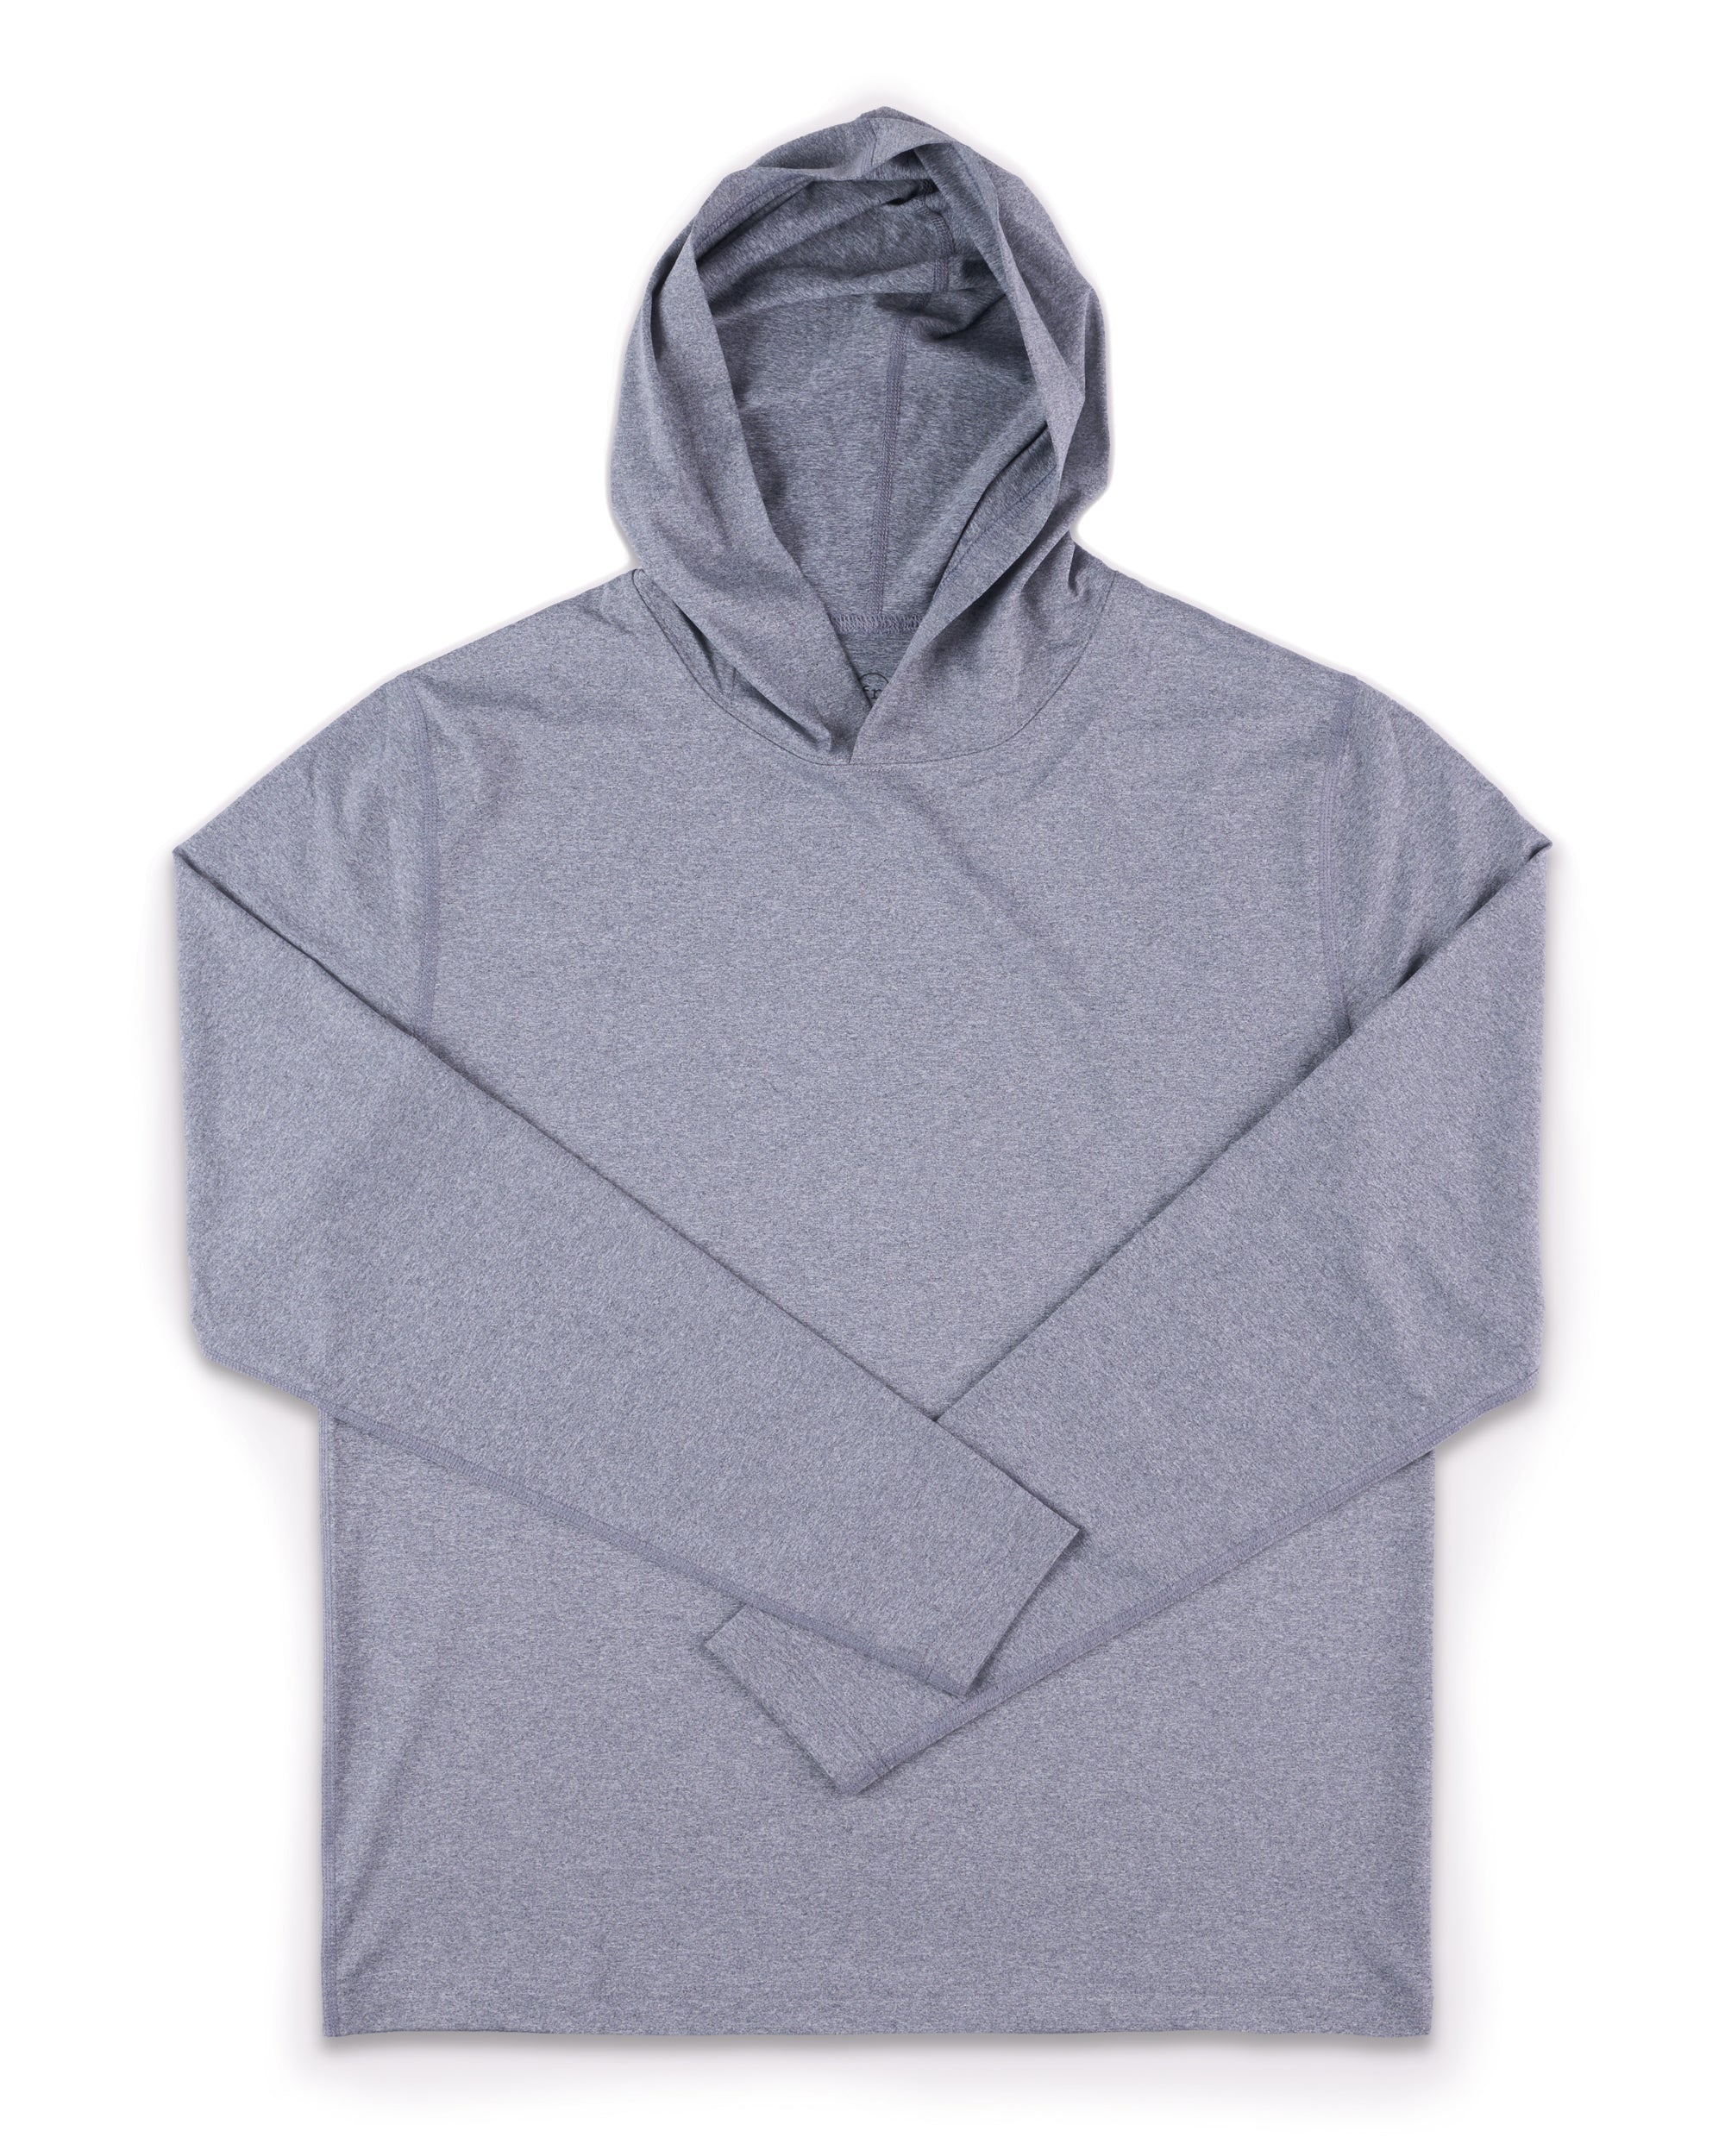 Performance Hooded LS T-Shirt Grey - Foreign Rider Co.